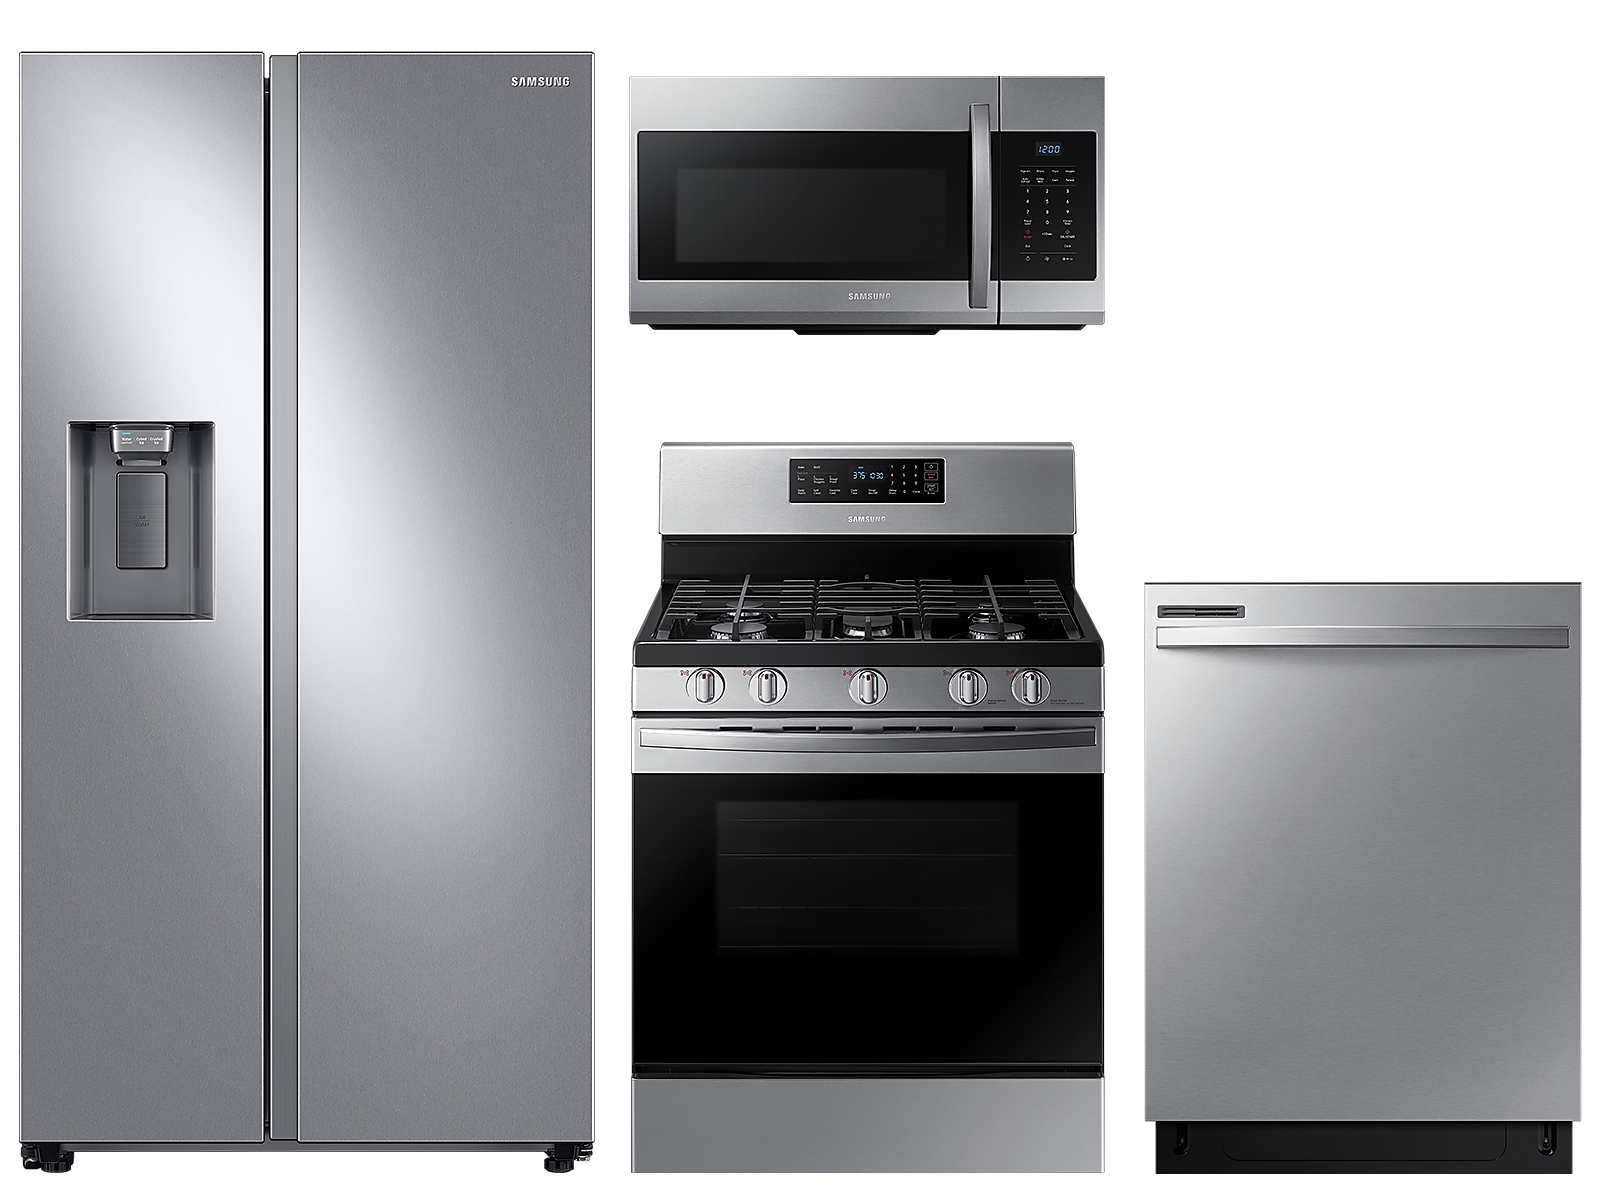 Samsung Large capacity Side-by-Side refrigerator & gas range package in Stainless Steel(BNDL-1590167698777)